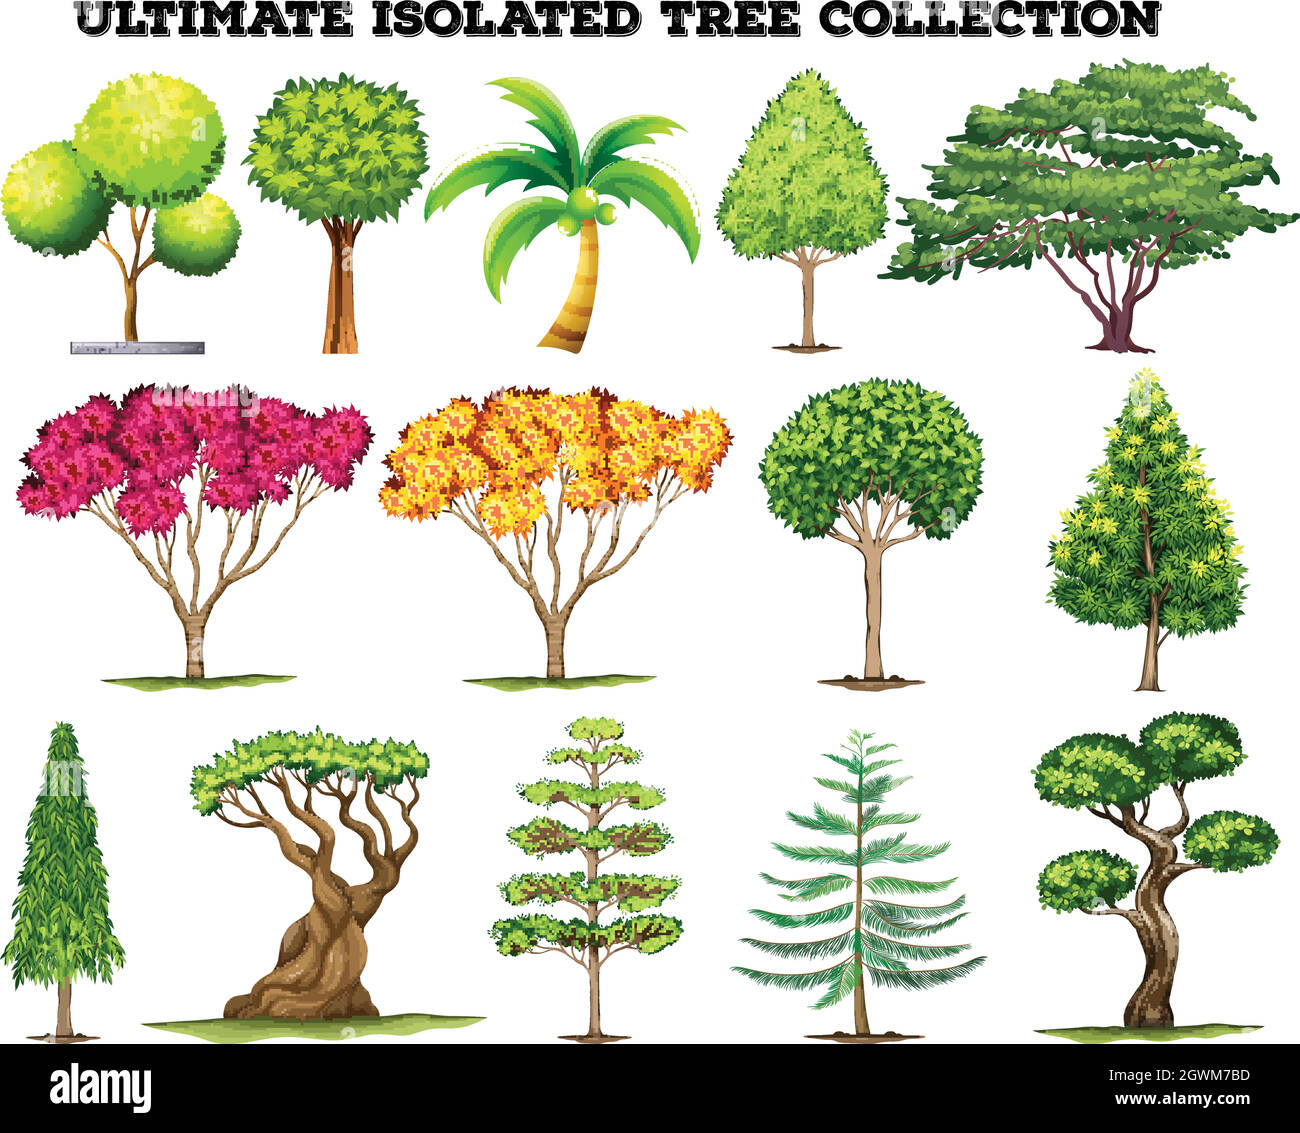 Ultimate isolated tree collection set Stock Vector